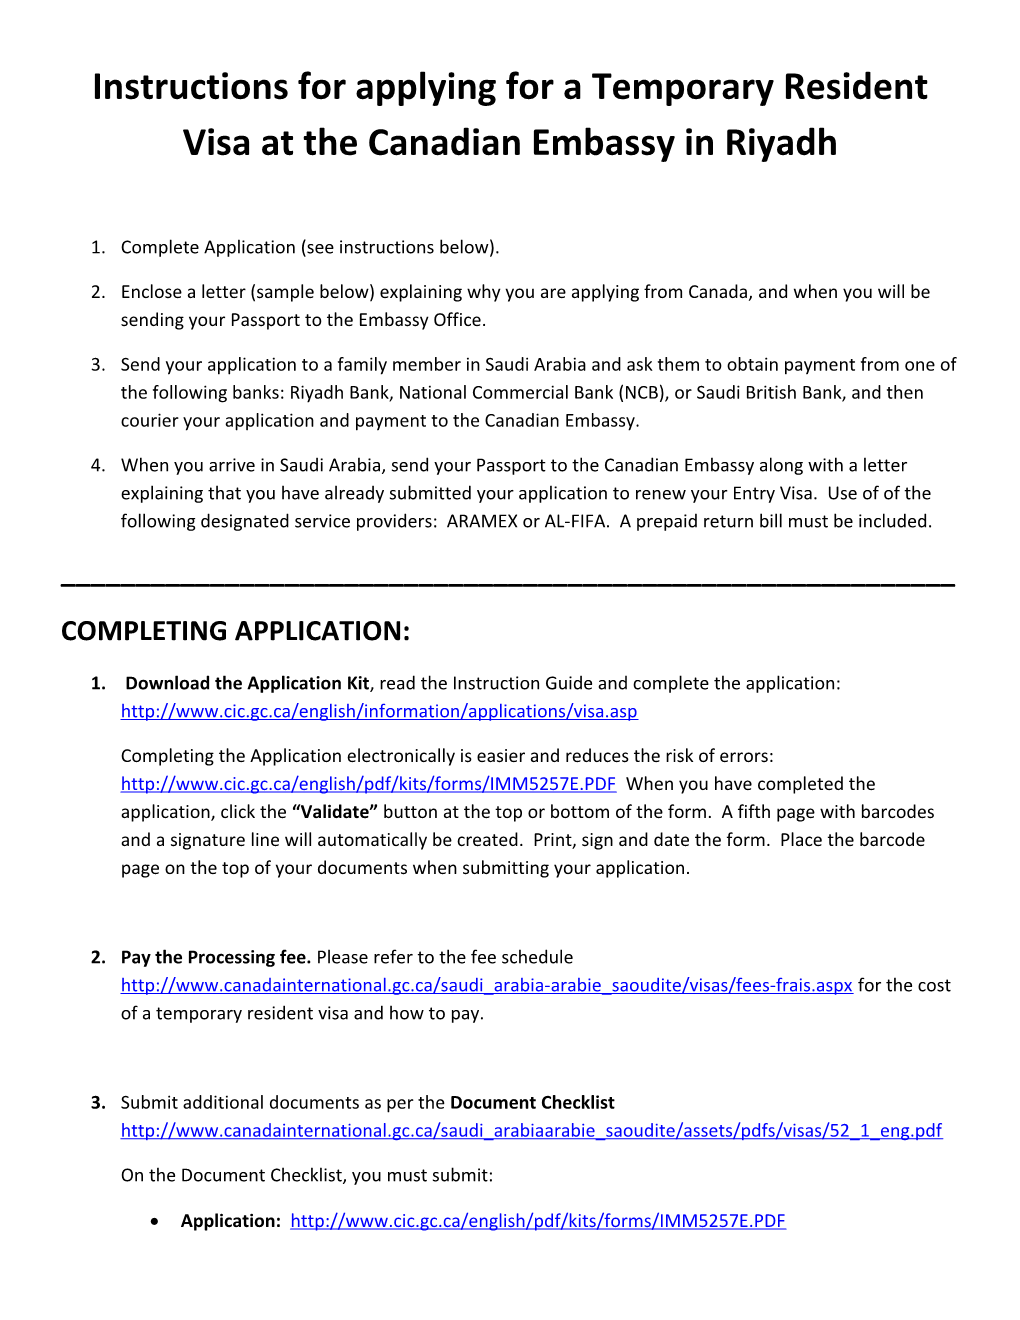 Instructions for Applying for a Temporary Resident Visa at the Canadian Embassy in Riyadh